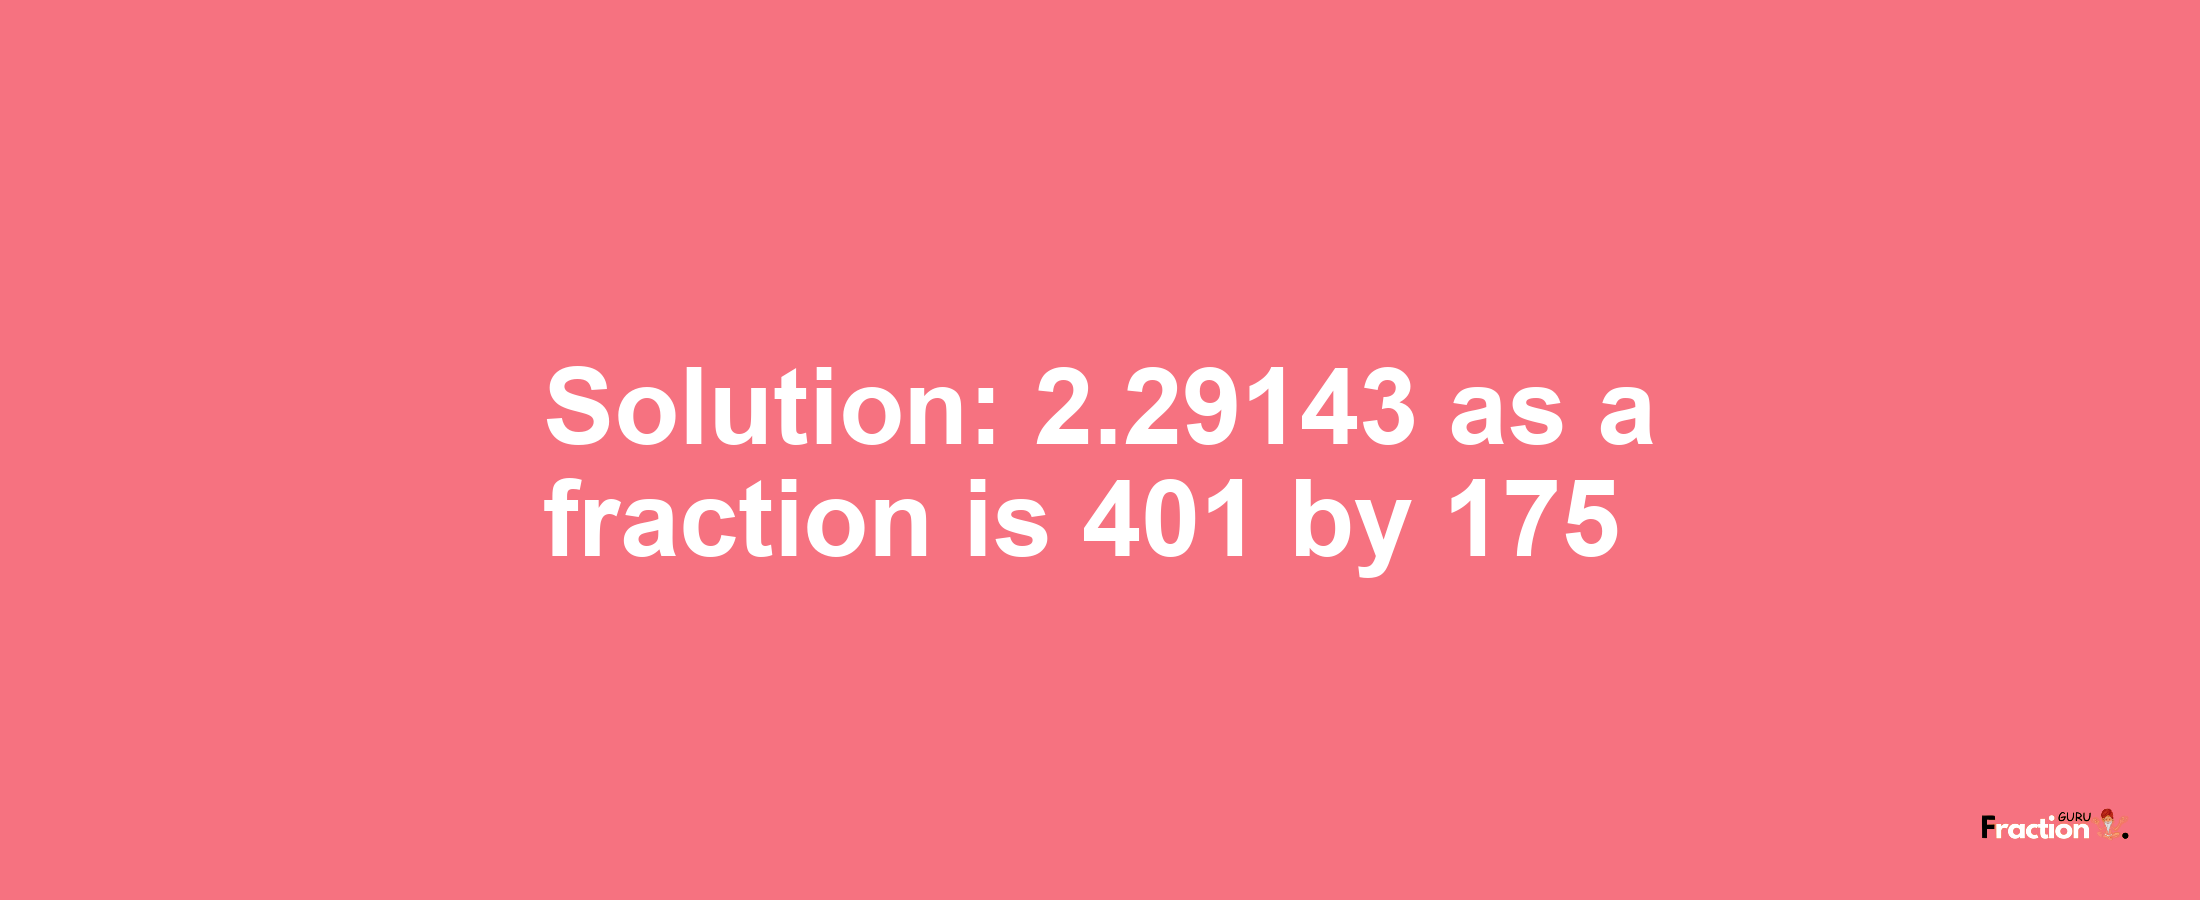 Solution:2.29143 as a fraction is 401/175